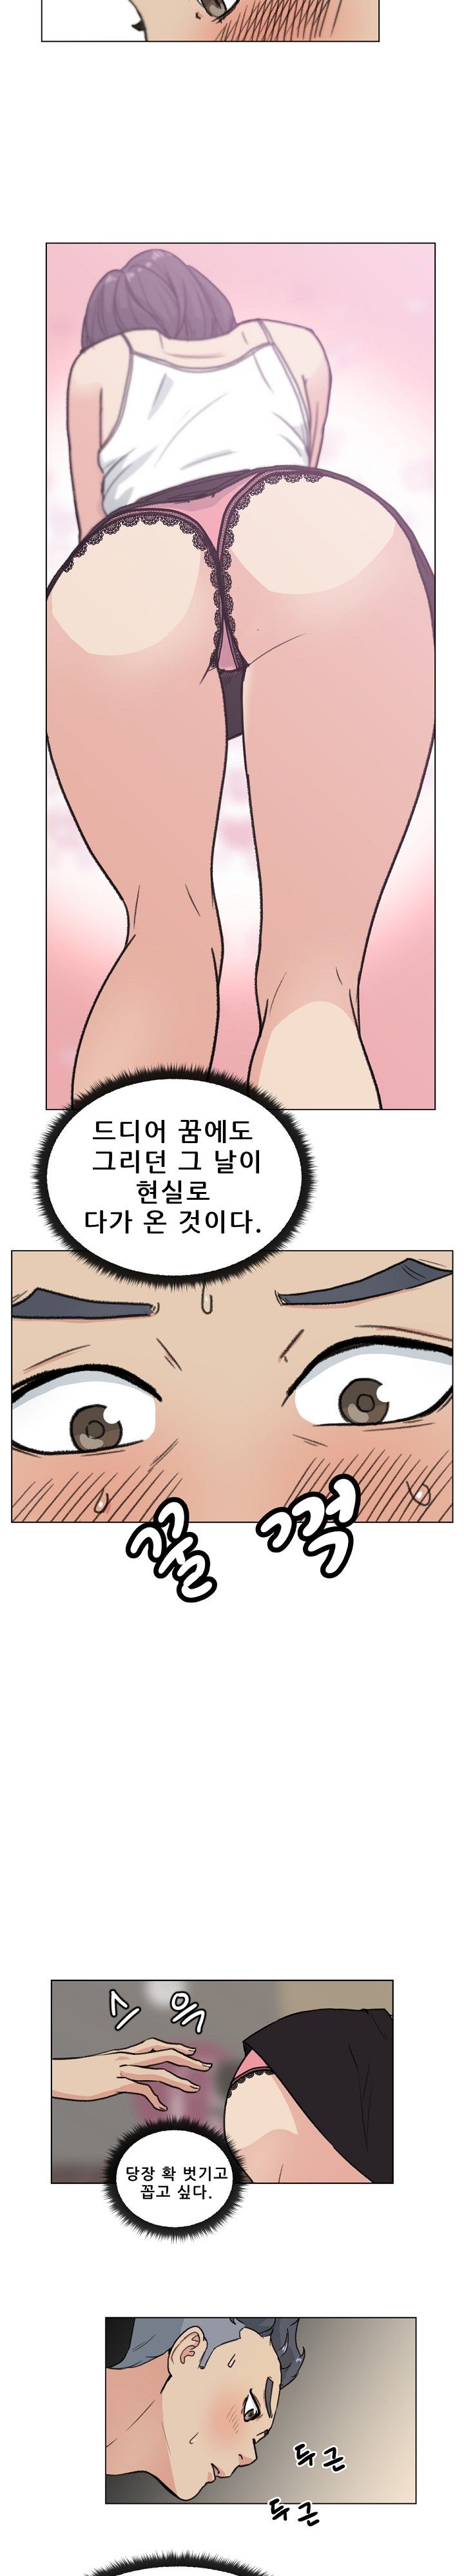 Sooyung Comic Shop Raw - Chapter 1 Page 12